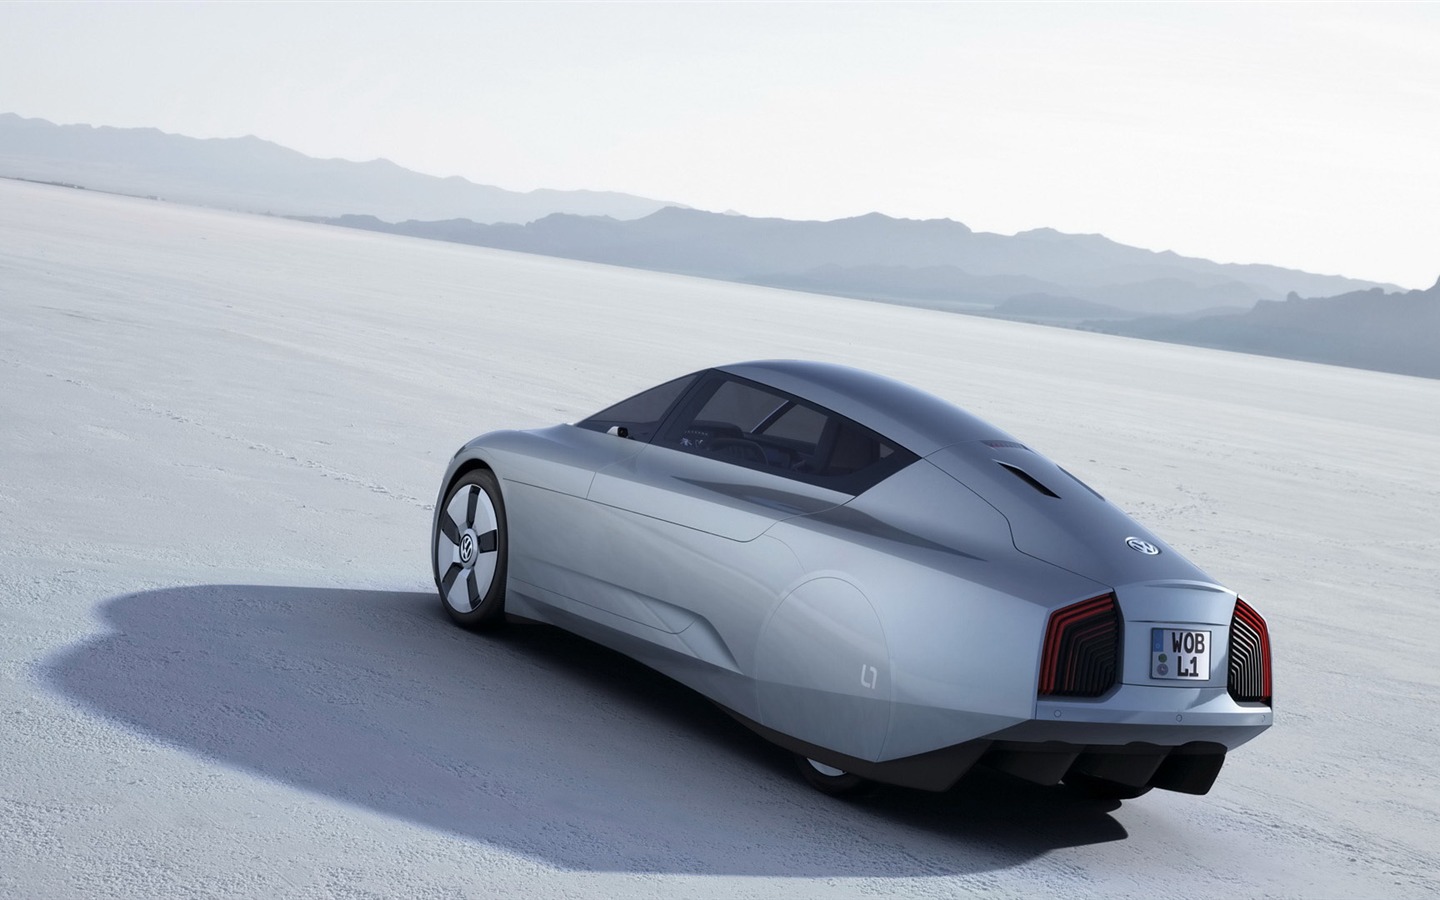 Volkswagen L1 Tapety Concept Car #15 - 1440x900